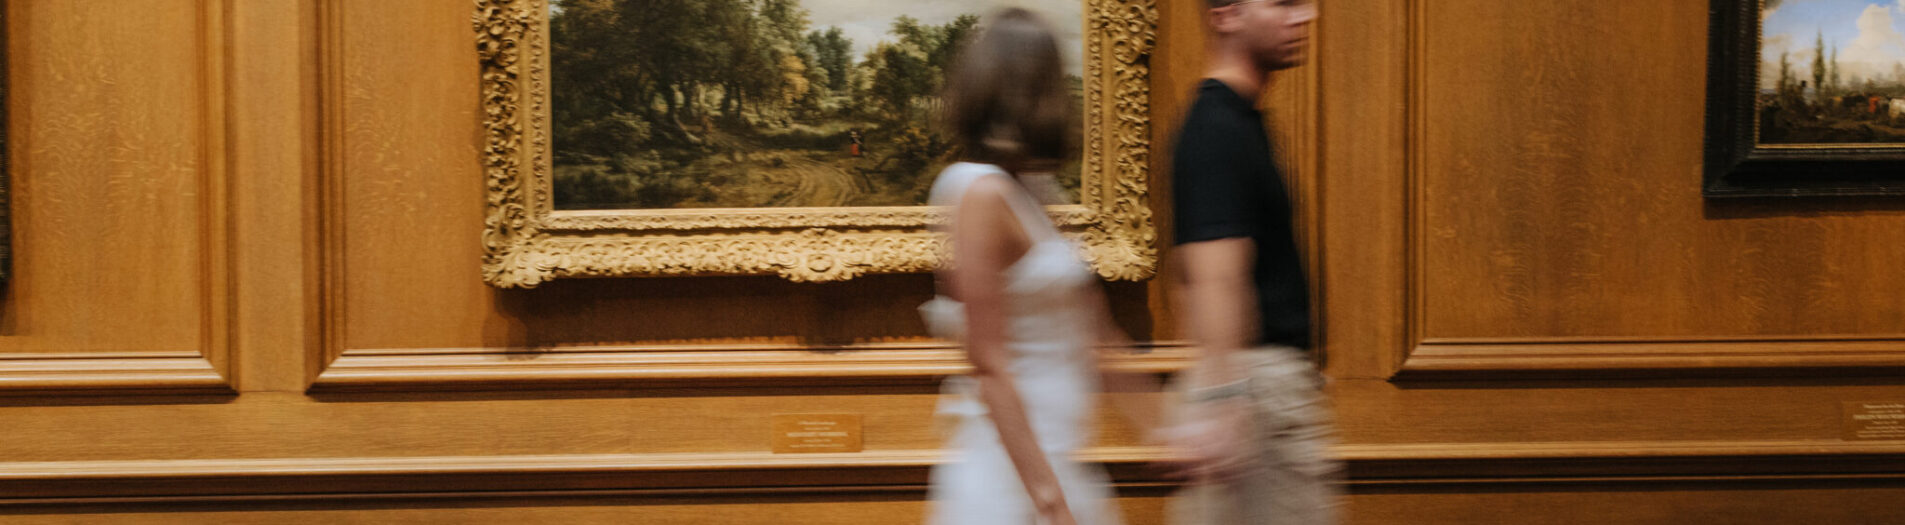 National Gallery of Art Engagement Session in Washington DC | S & H